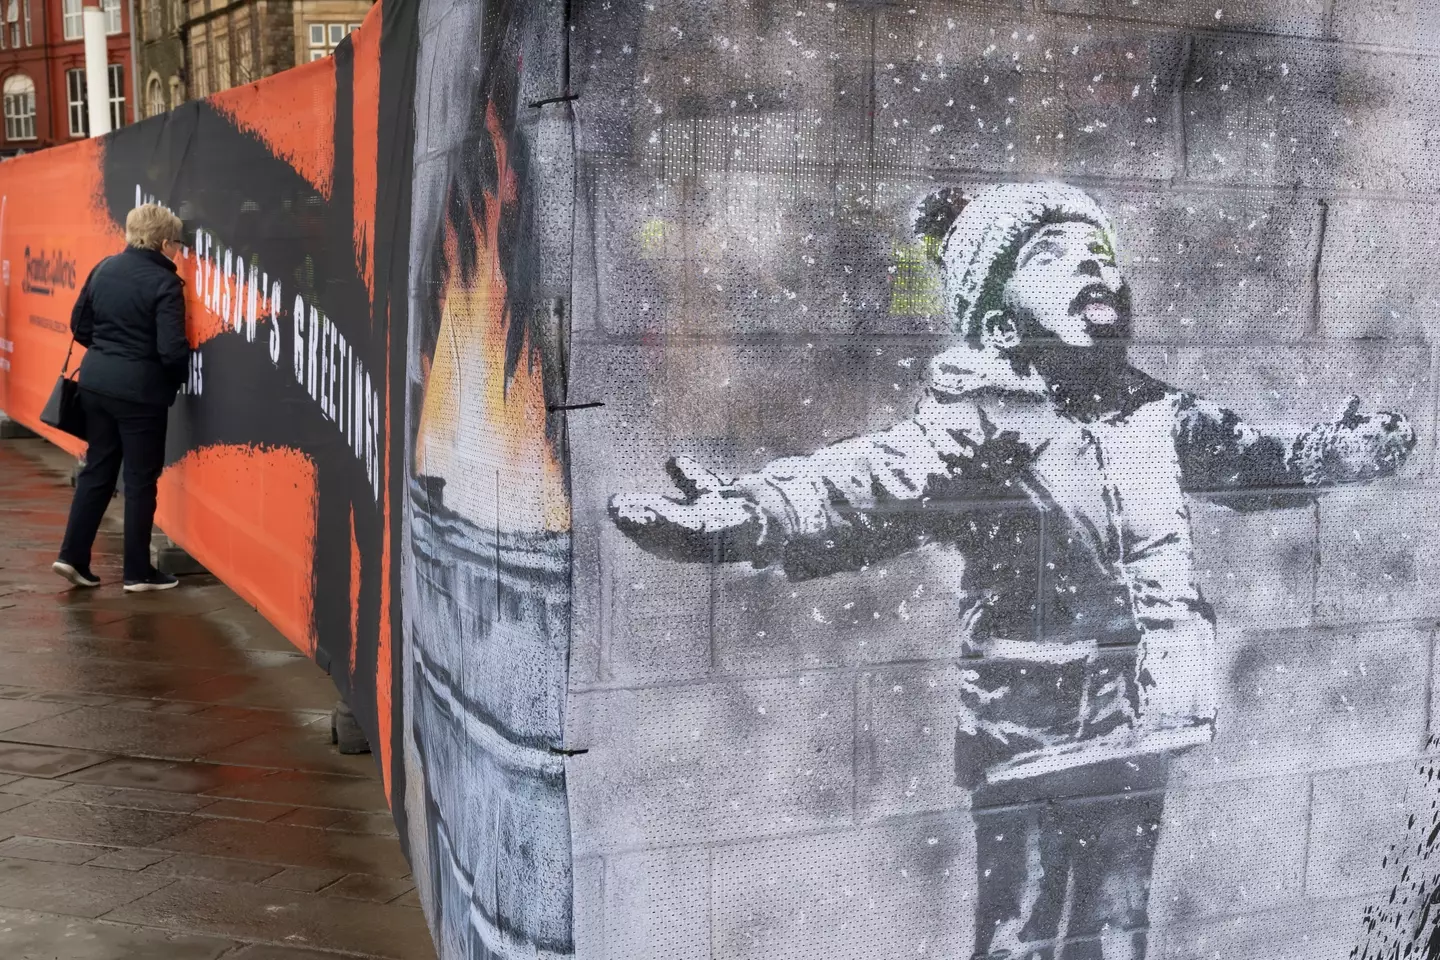 Could Banksy finally be unmasked?